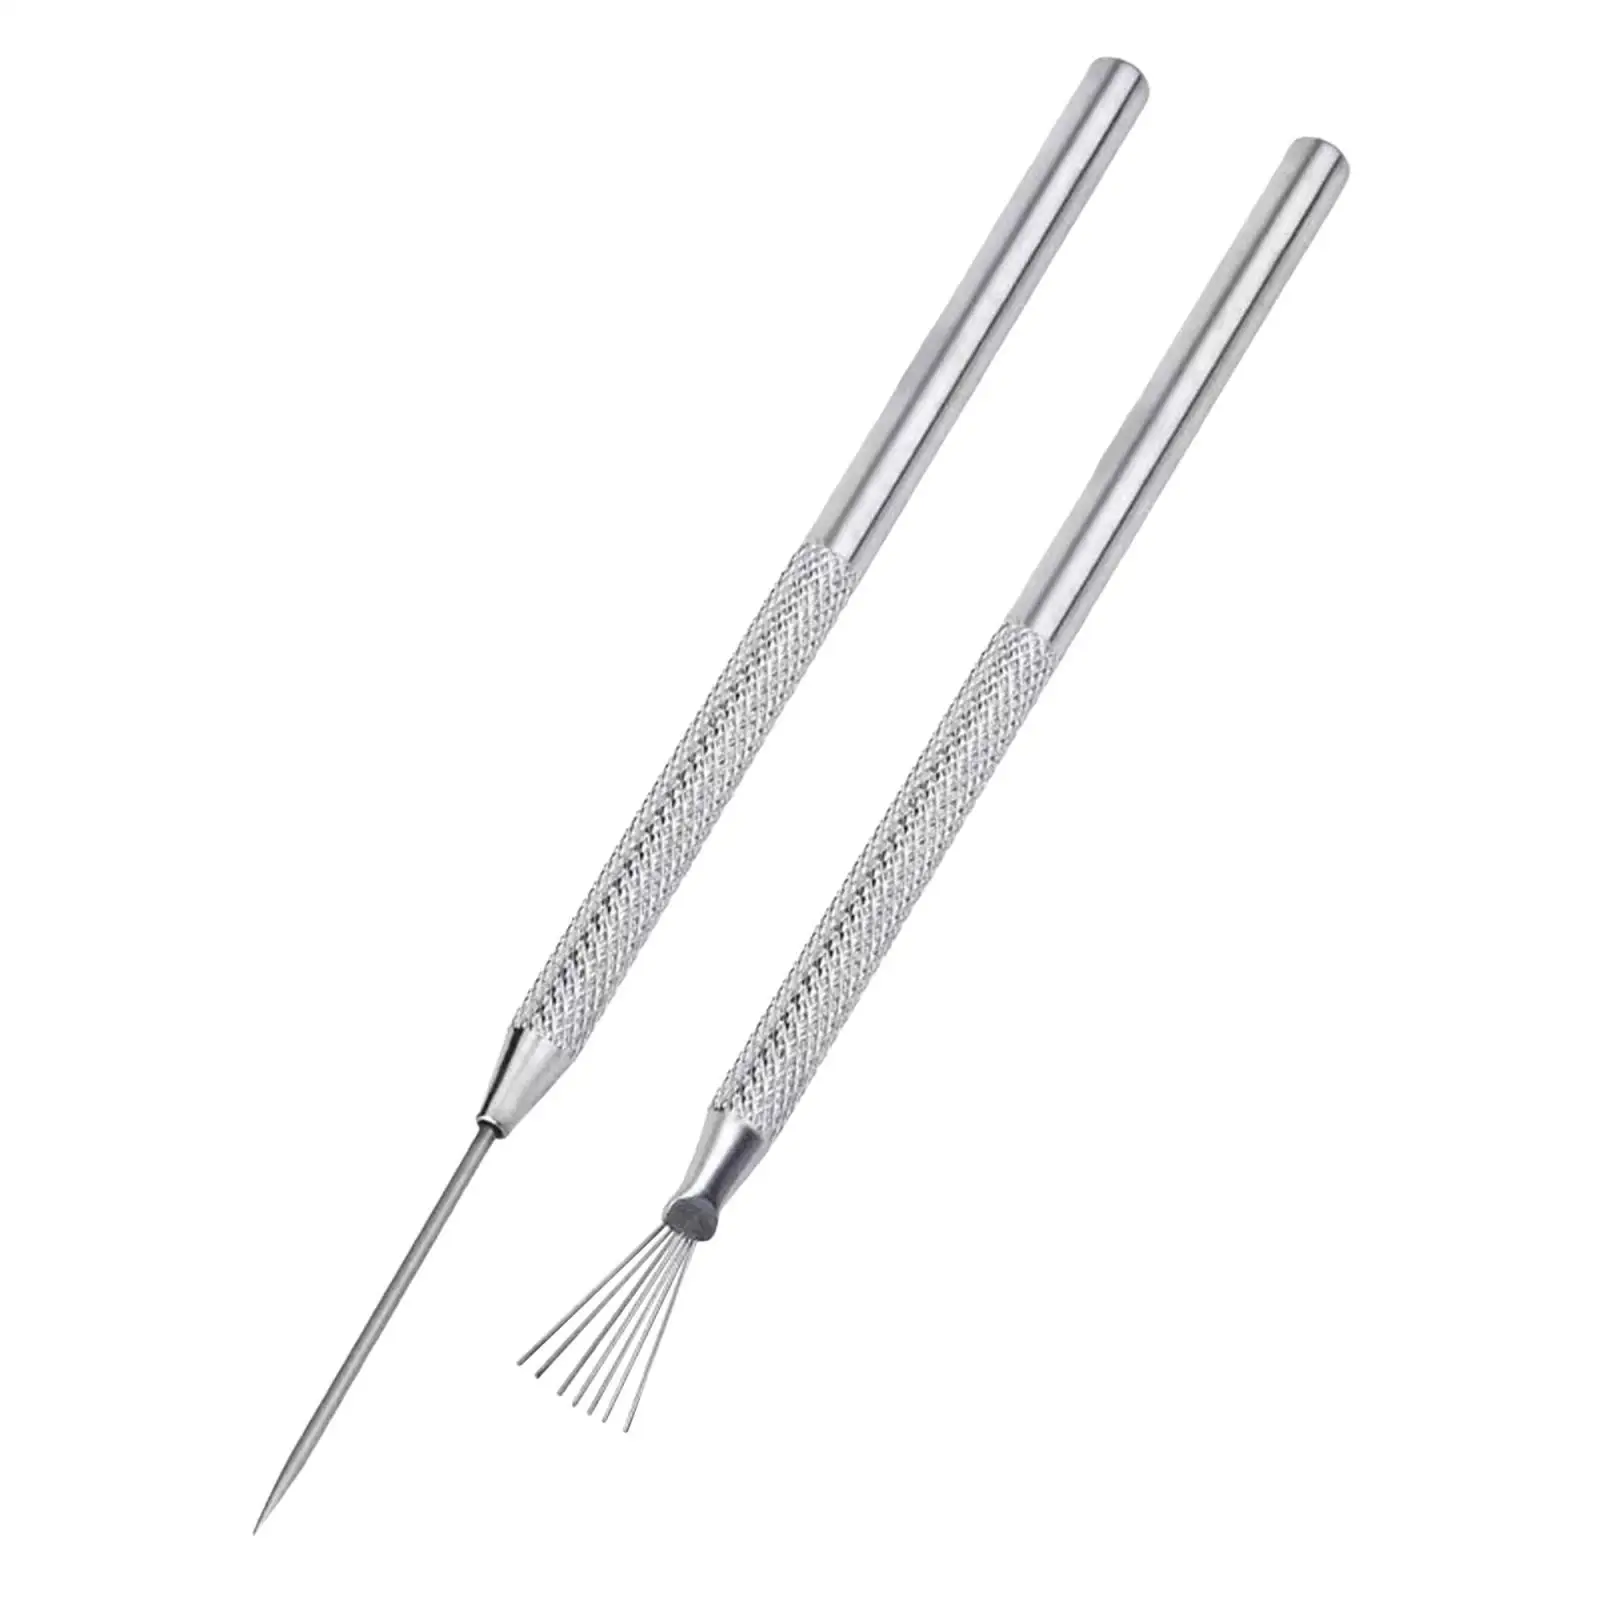 2 Pieces Pottery Clay Sculpting Tool Set Sculpting Tool for Shaping Professional